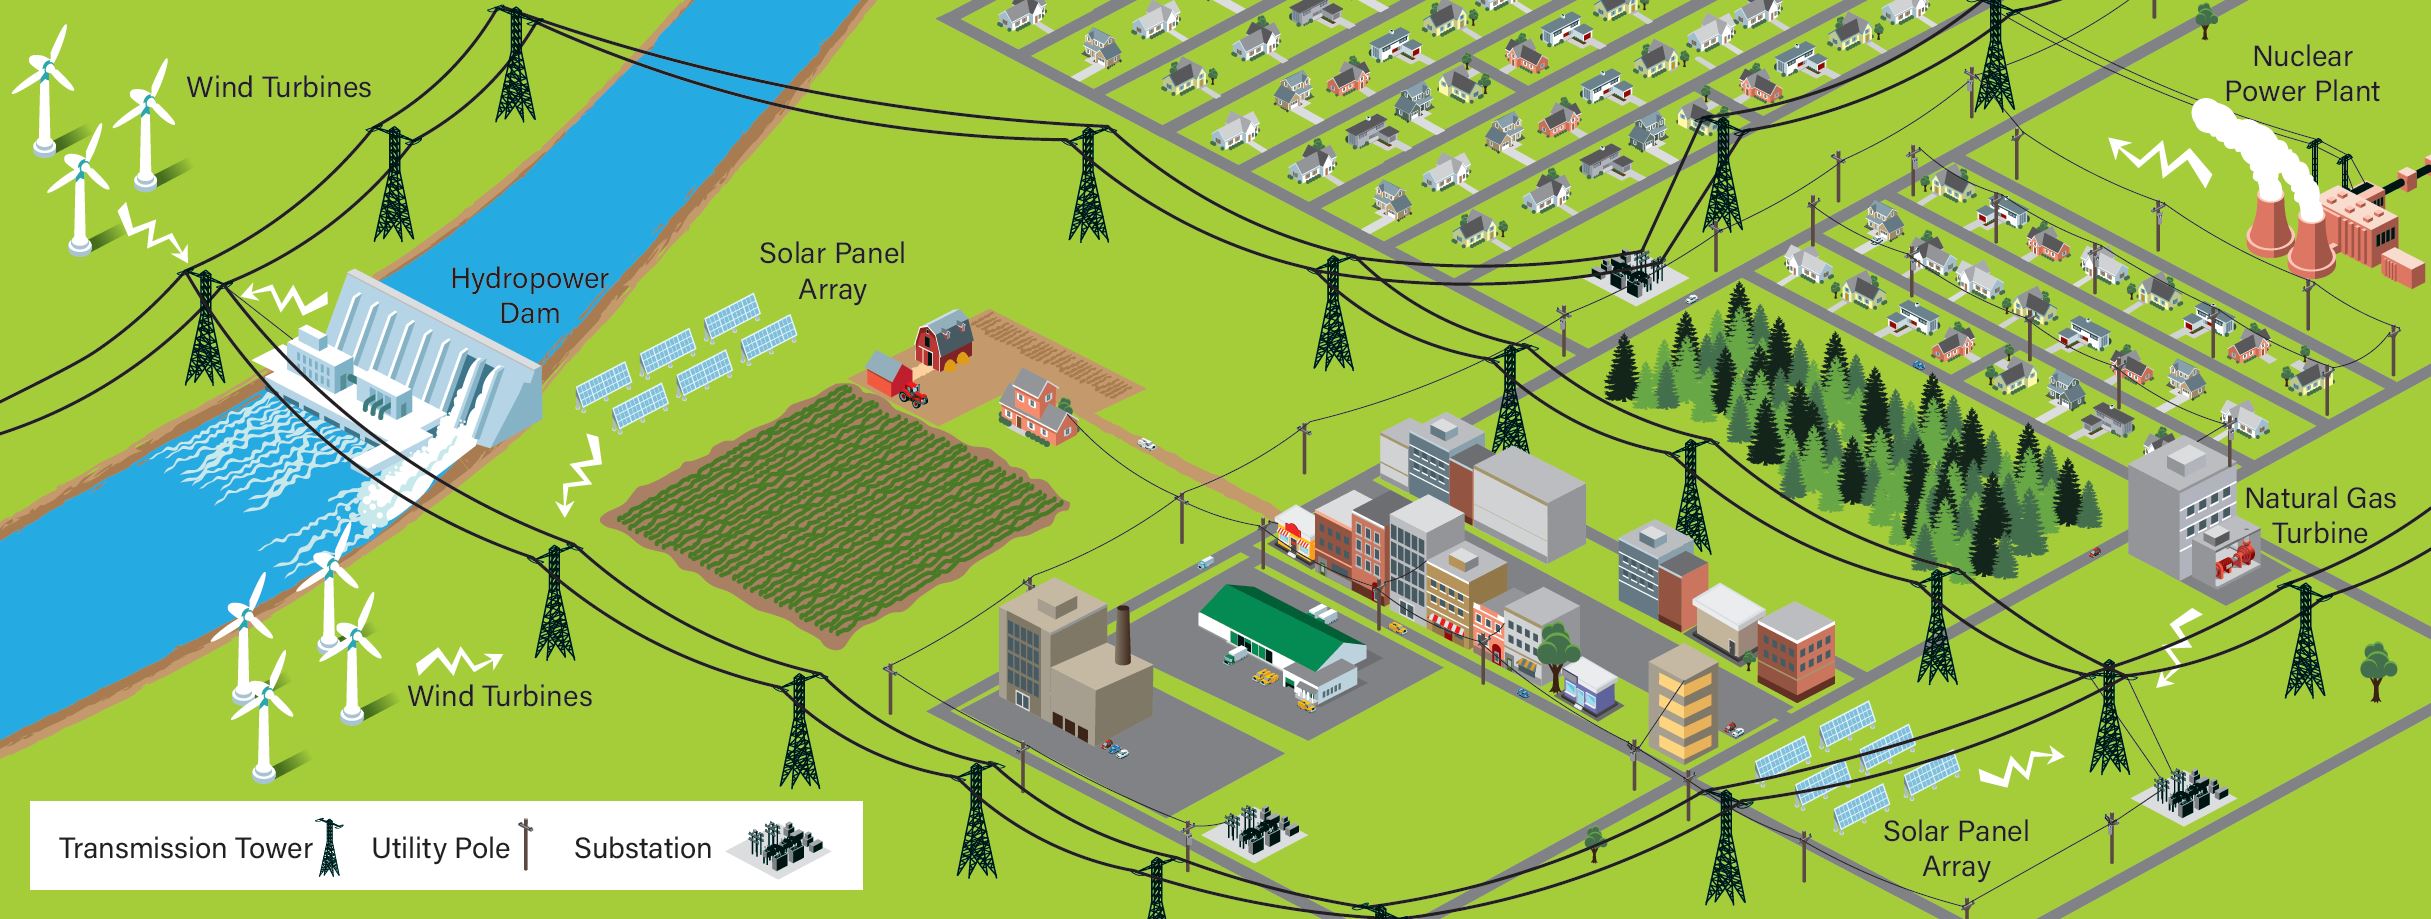 Power Generation Graphic showing the web-like power grid between generation stations and businesses/homes.